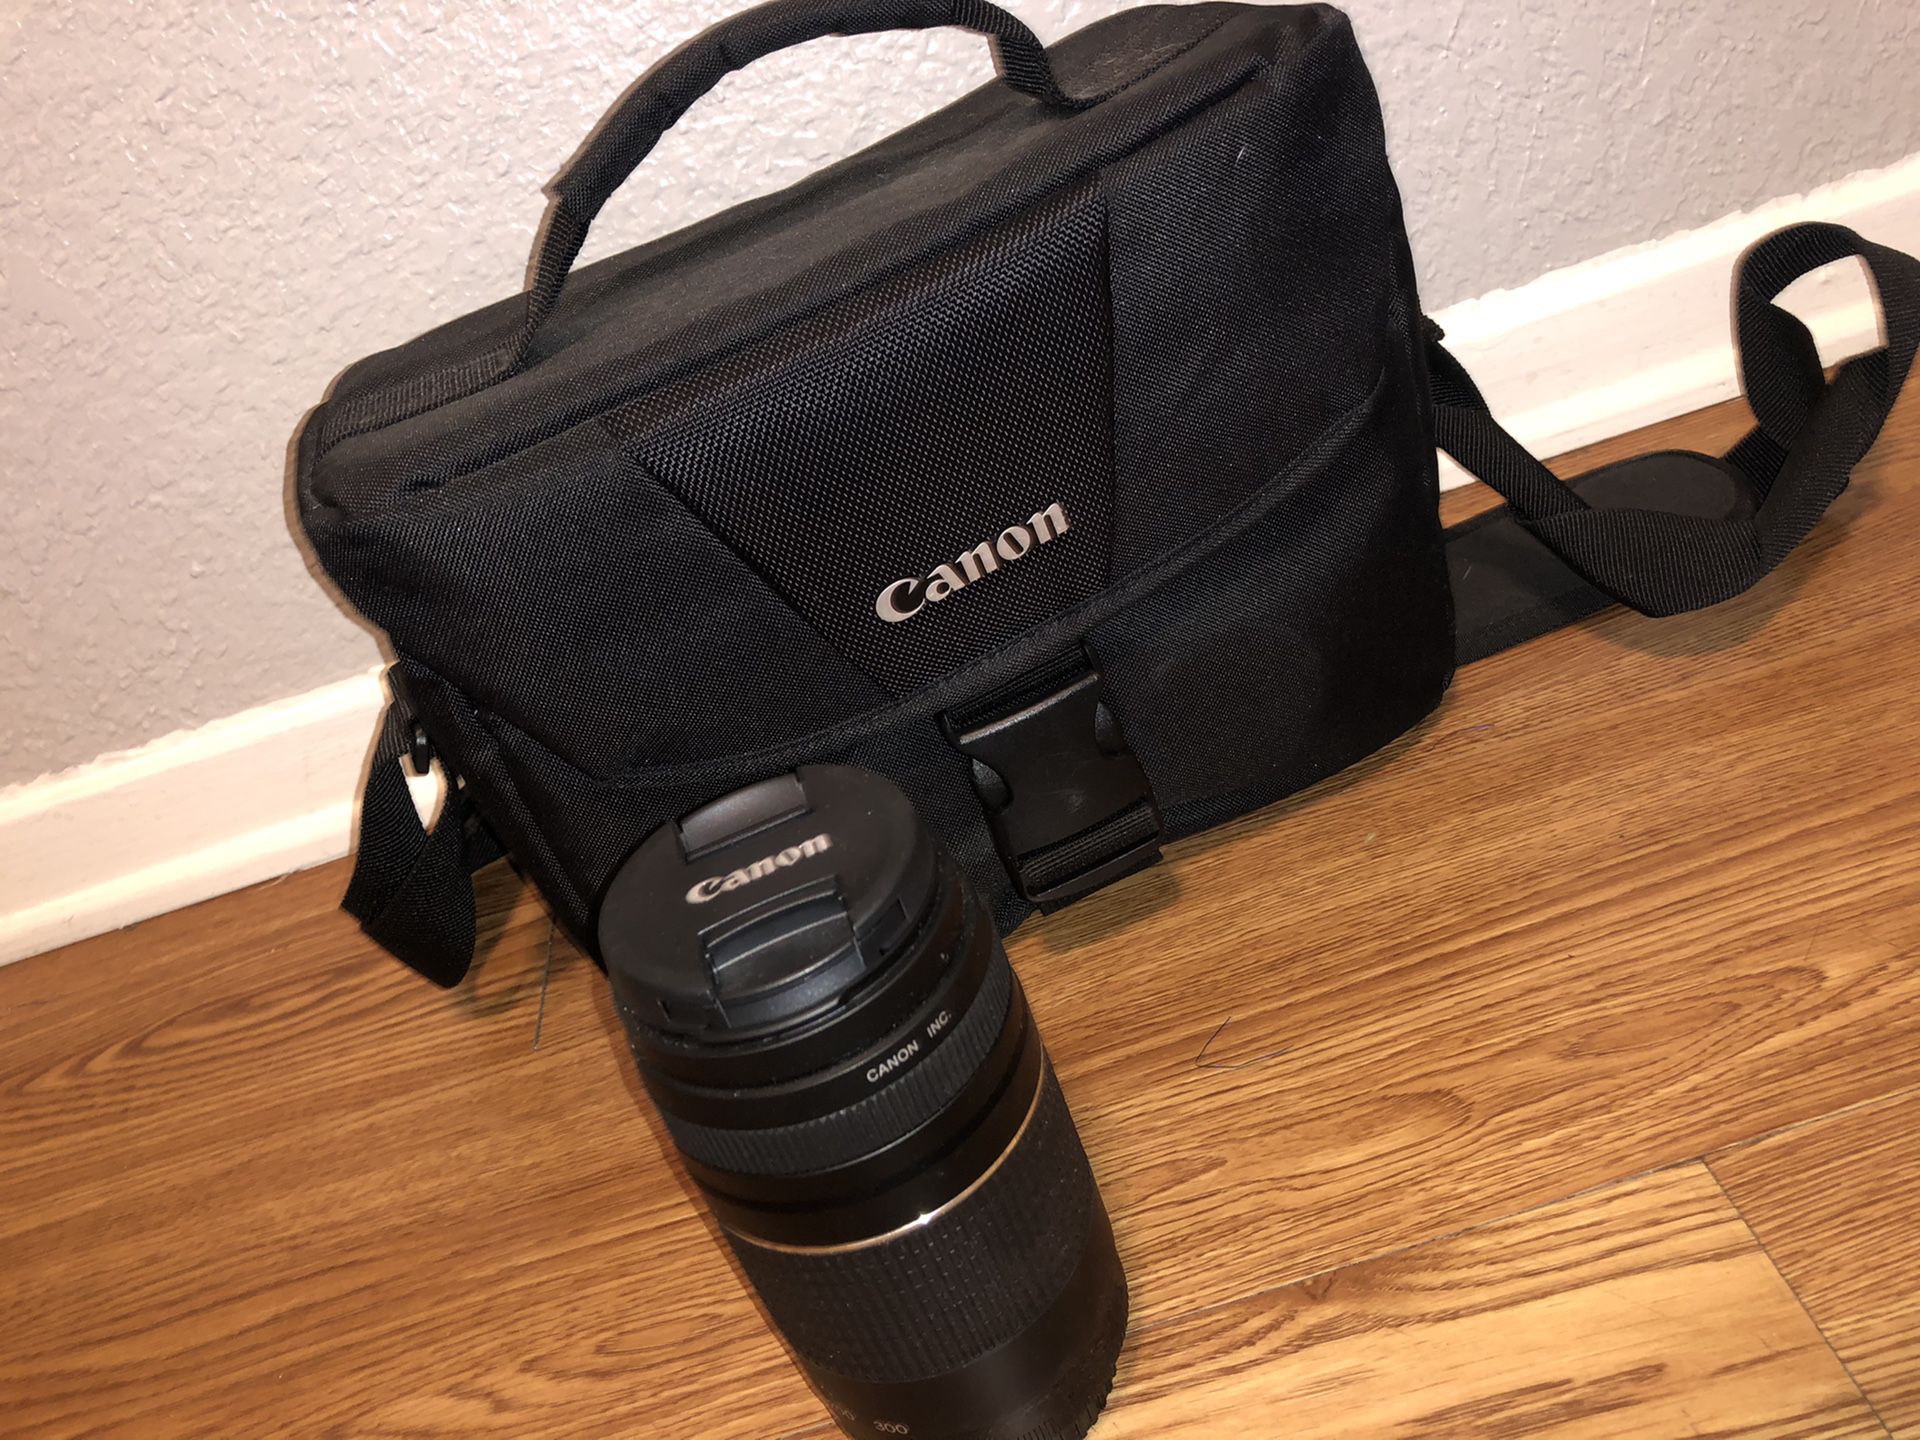 Canon Lens (70-30mm) and Camera bag